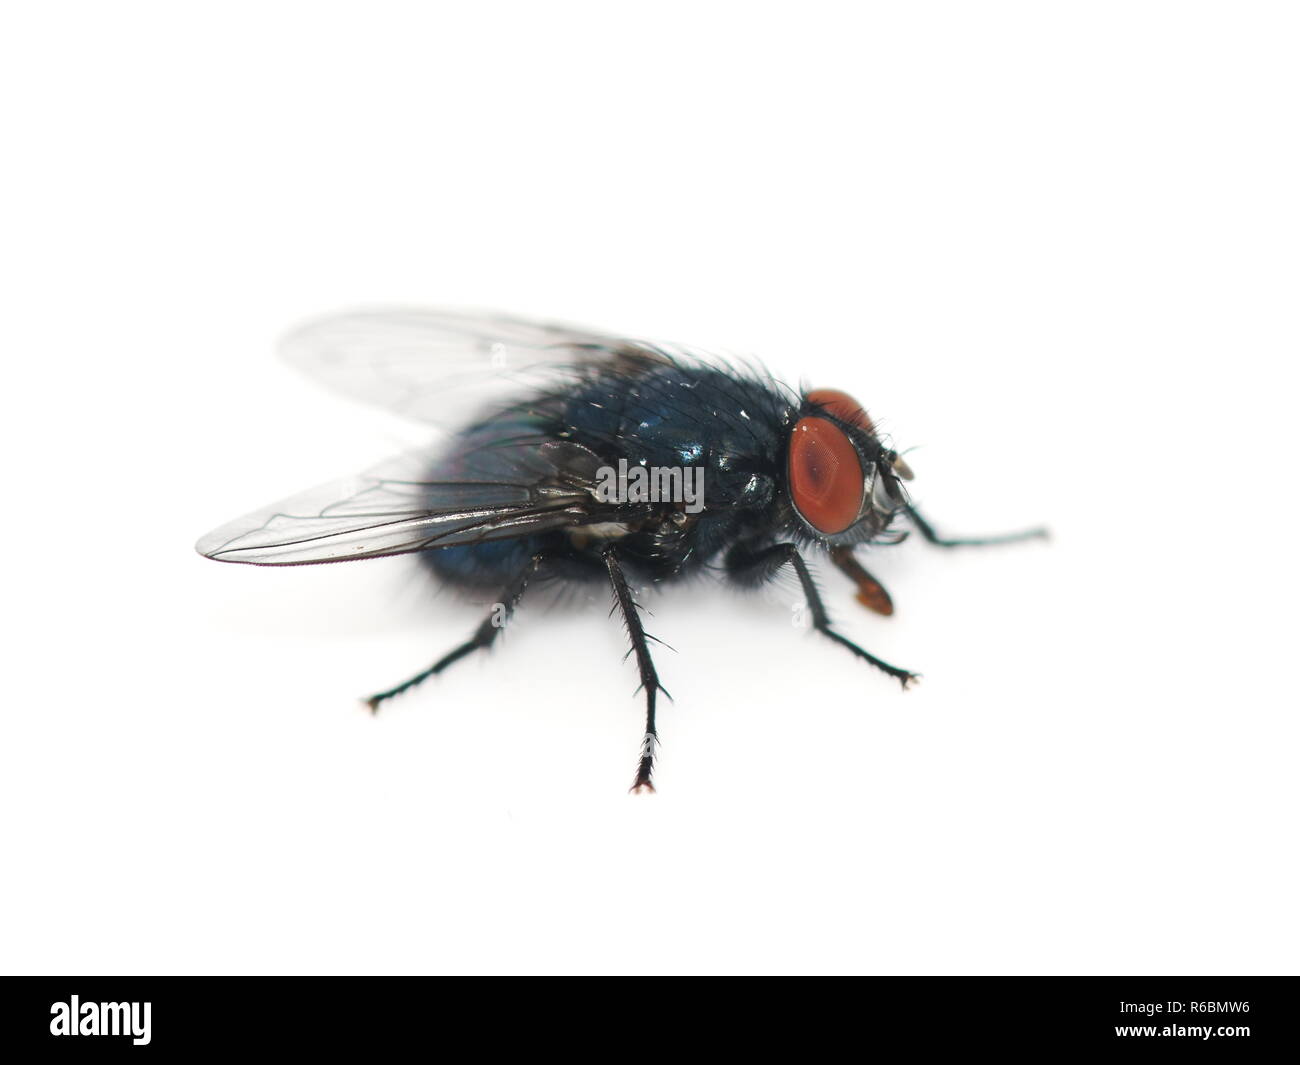 Closeup on the bluebottle fly Calliphora vomitoria isolated on white background Stock Photo